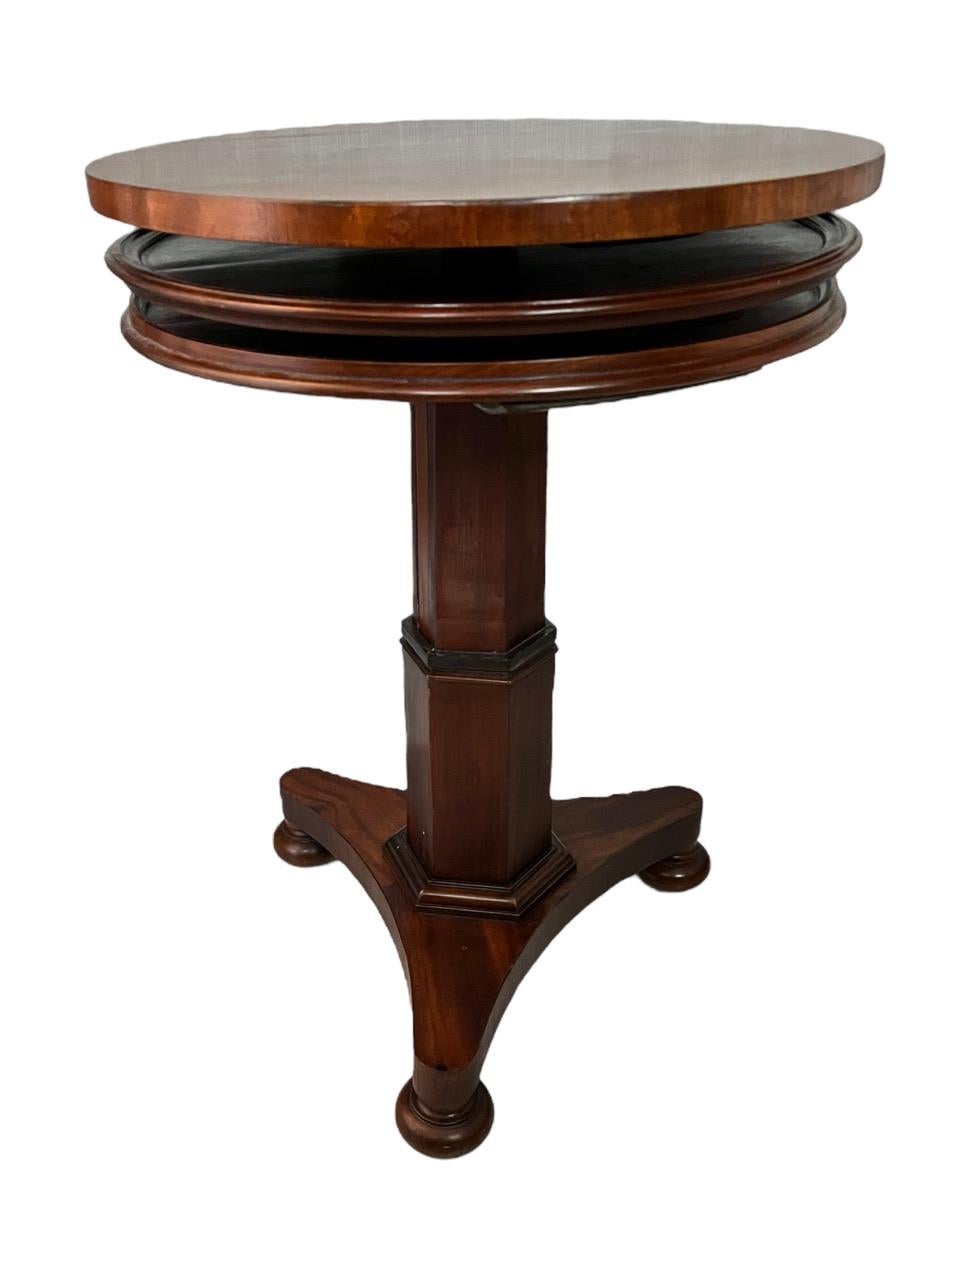 Wood 18th Century English Mahogany Expandable Round Three Tier Dumbwaiter Table For Sale